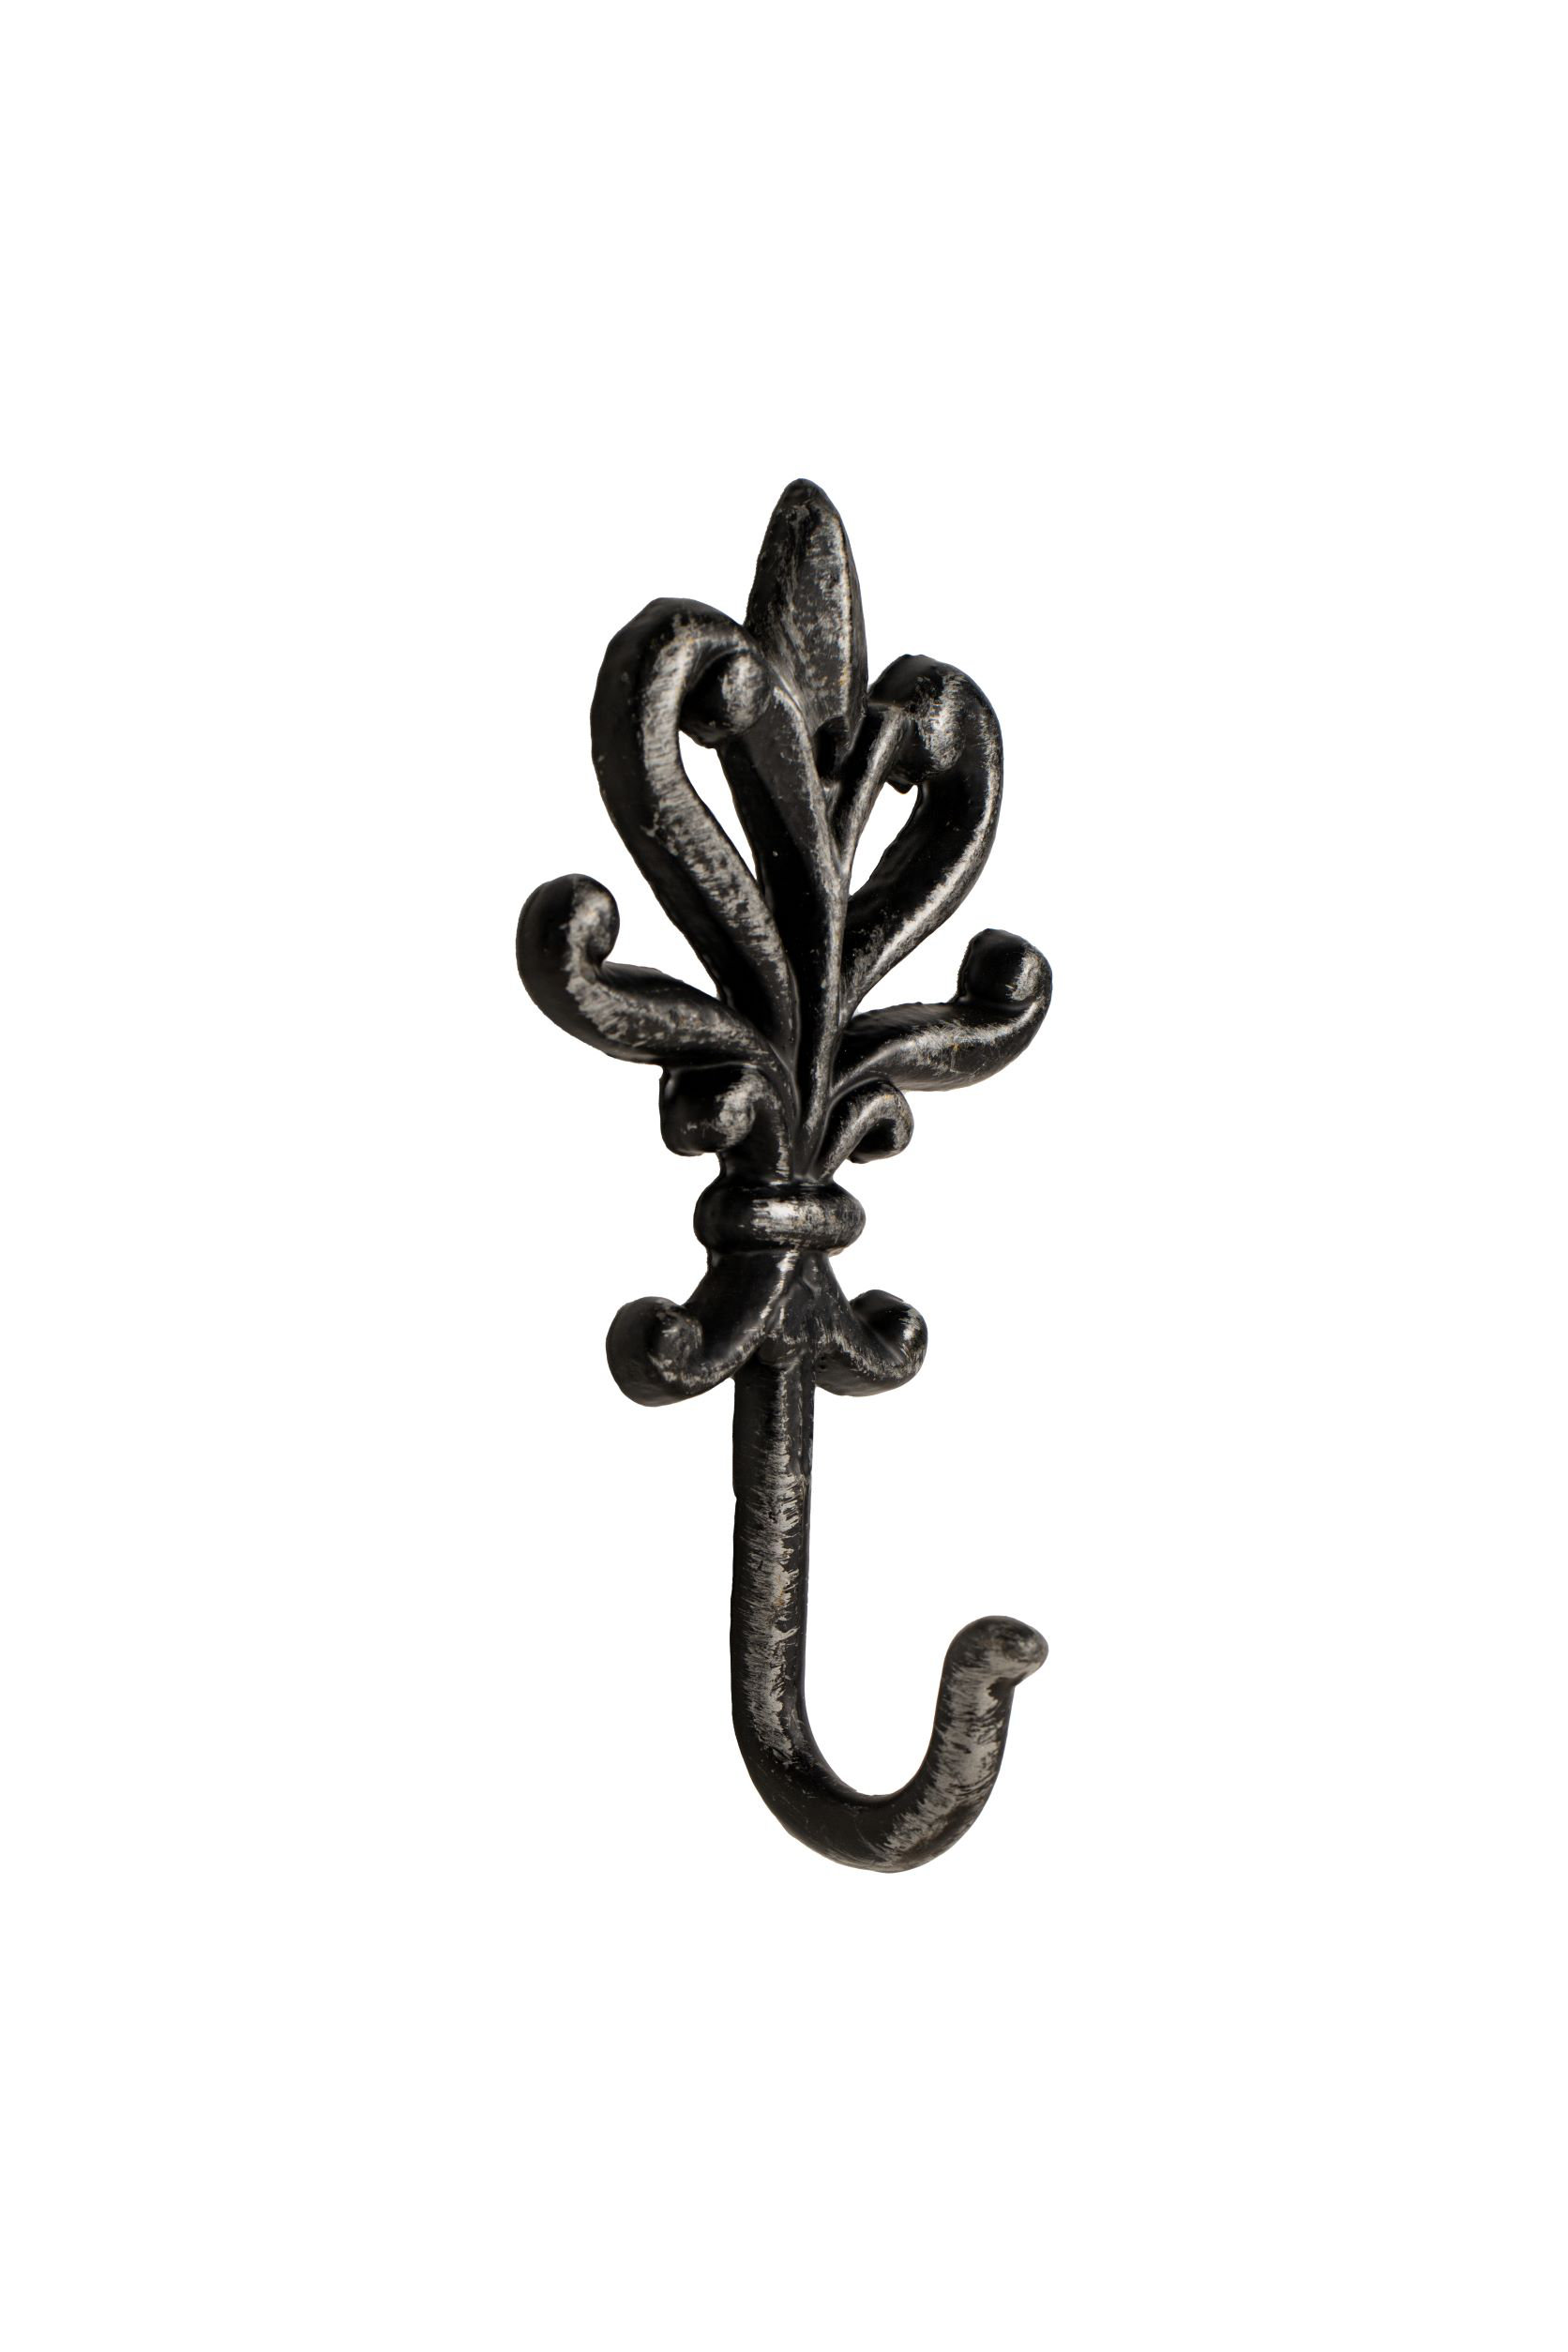 Cast Iron Metal Garden Tool Wall Coat Hat Robe Hook Rack Home Shed